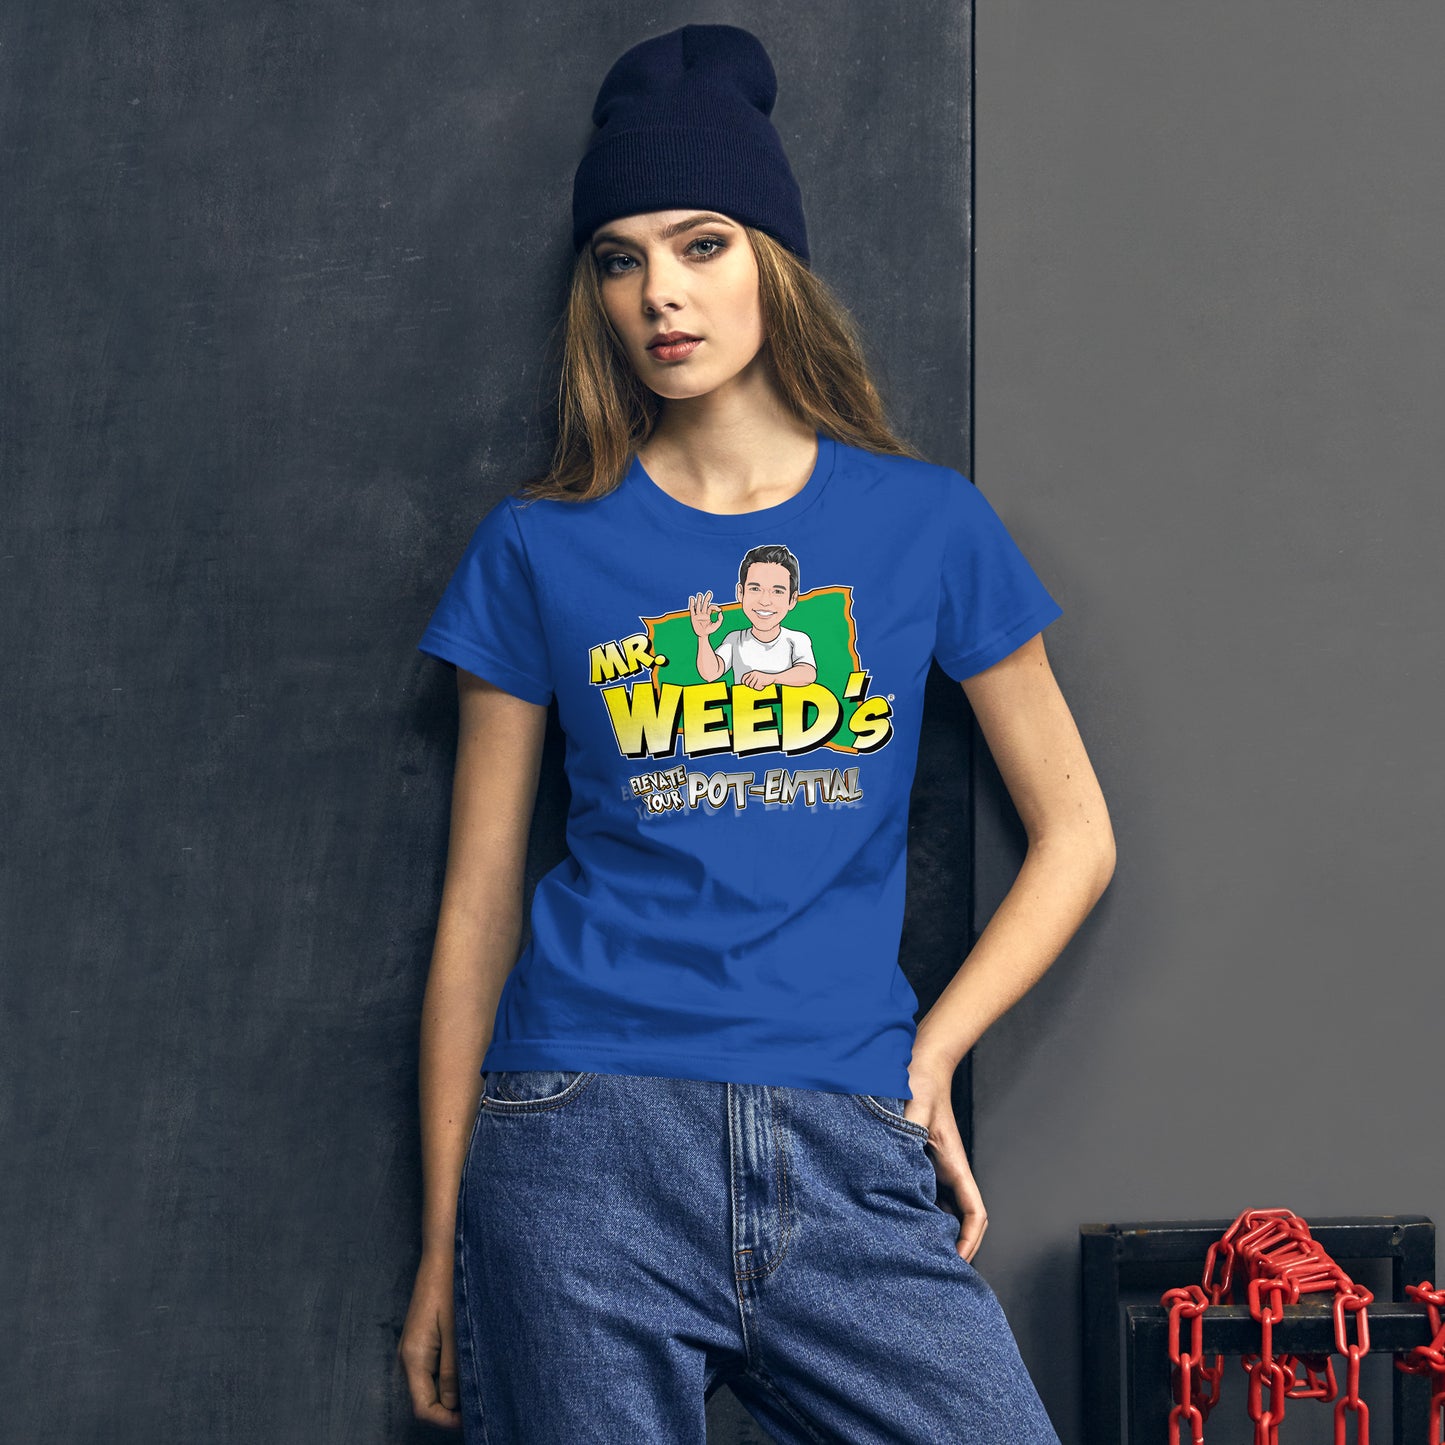 Mr. Weed's: Elevate Your Pot-ential (Women's short sleeve t-shirt)